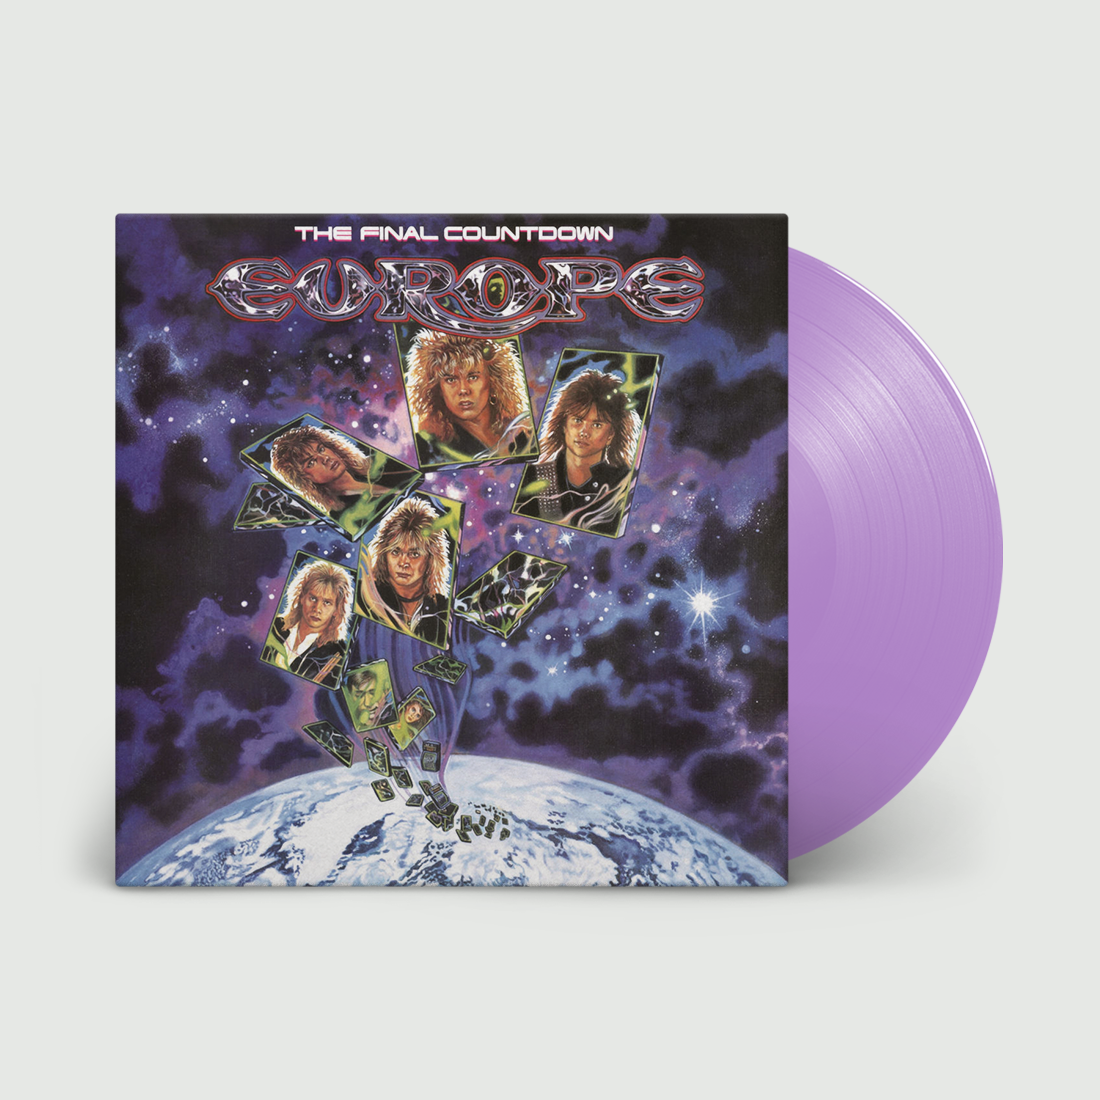 EUROPE - The Final Countdown - LP - Limited Light Purple Vinyl [NAD-OCT10]